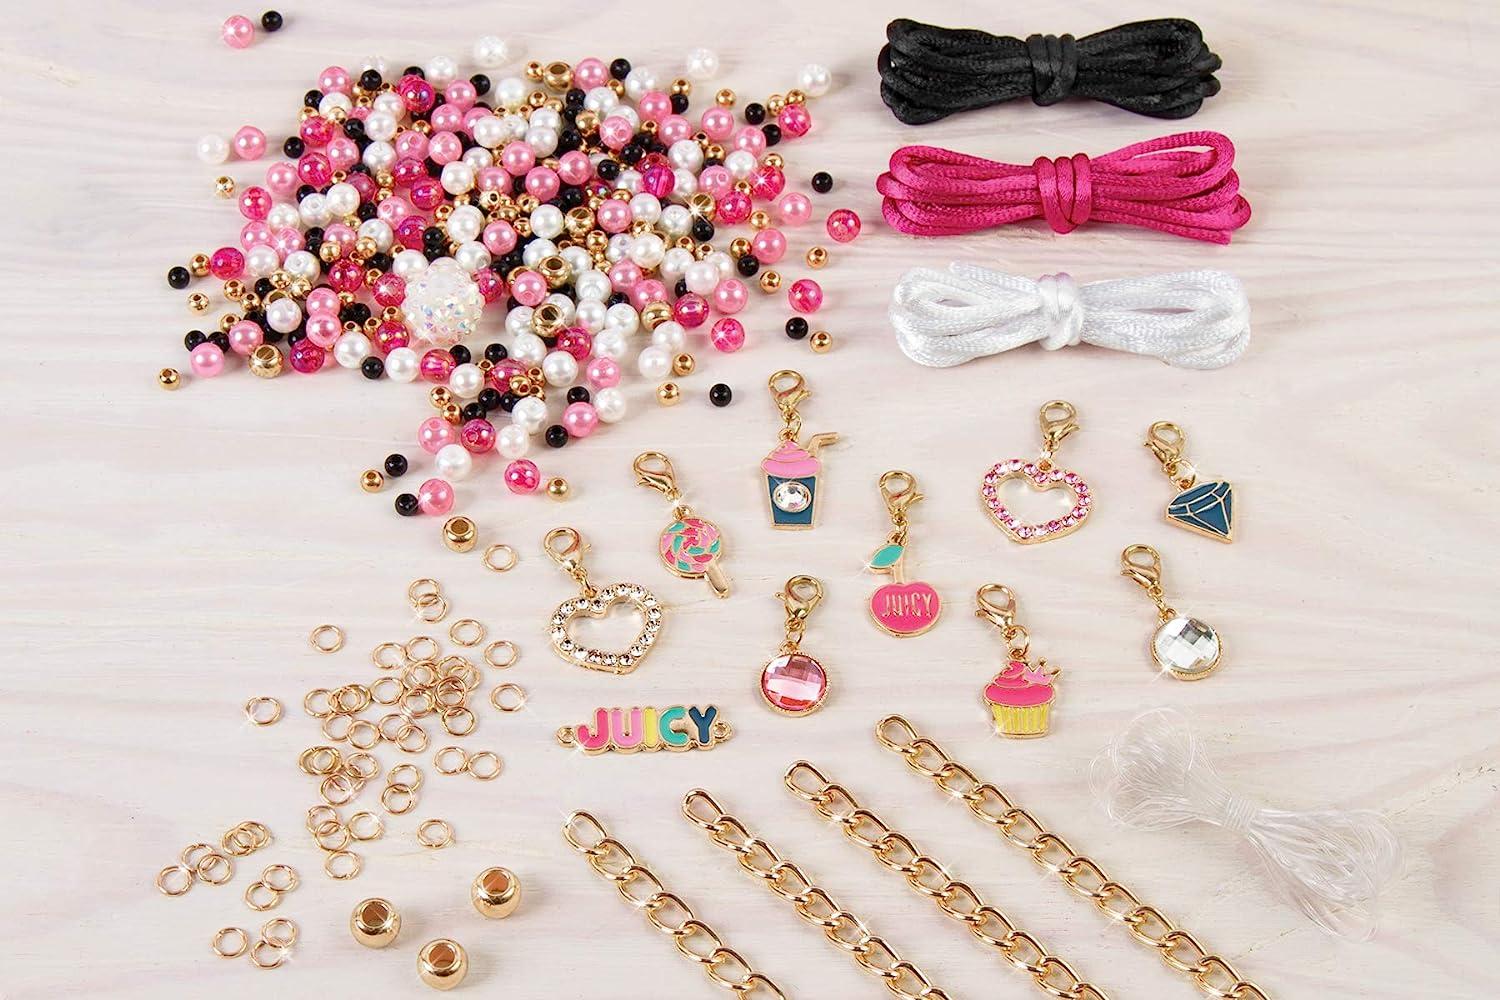 Make it Real - Juicy Couture Pink and Precious Bracelets - DIY